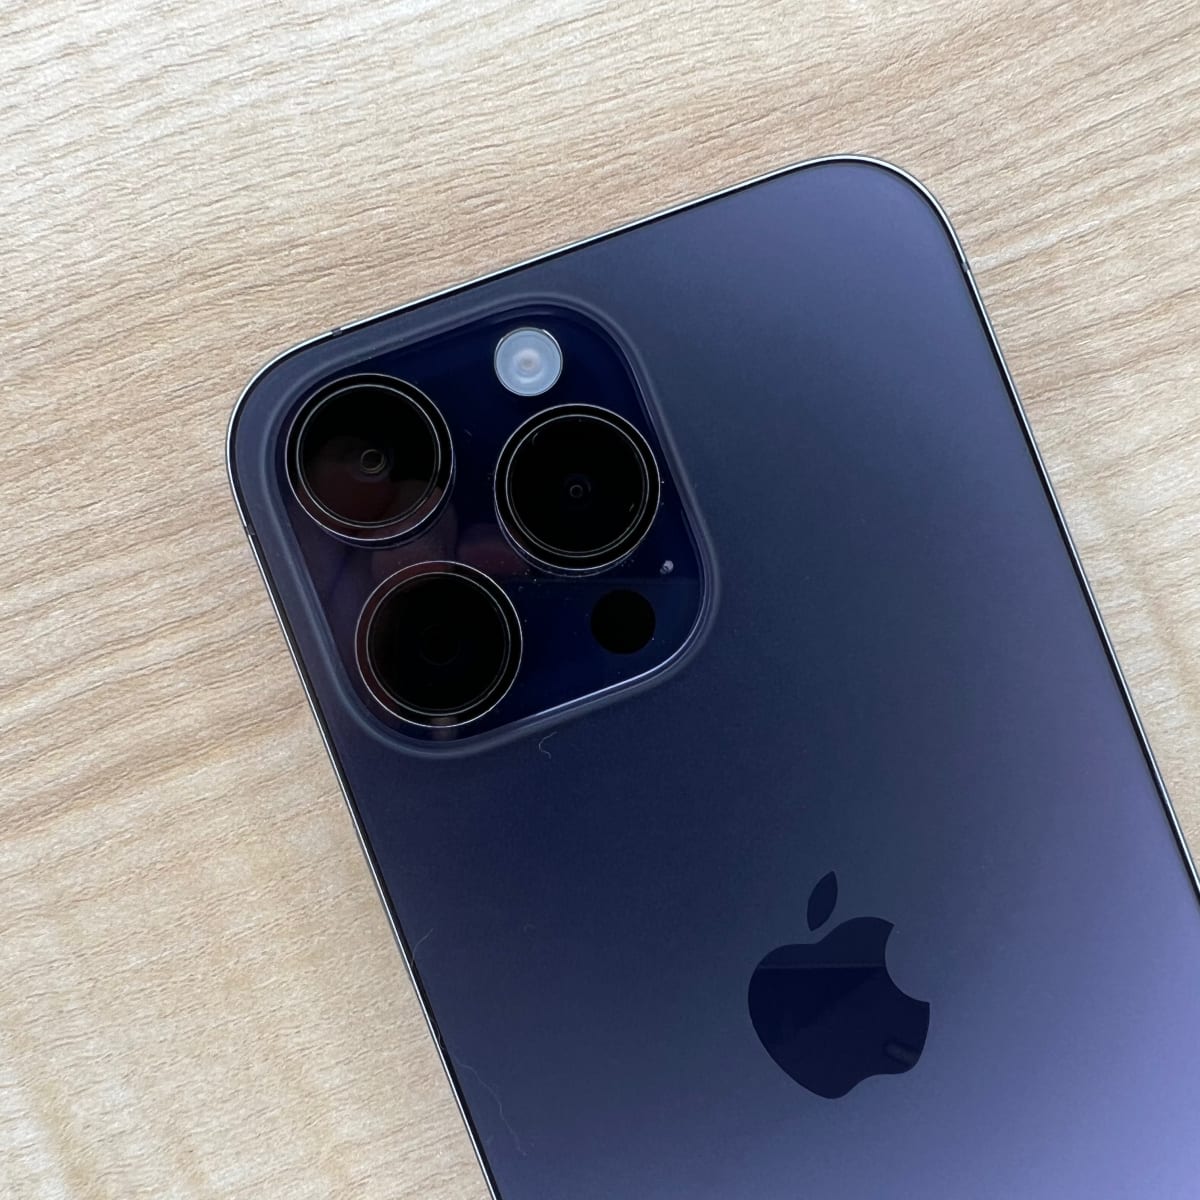 Apple iPhone 14 Pro and iPhone 14 Pro Max Review - Sports Illustrated